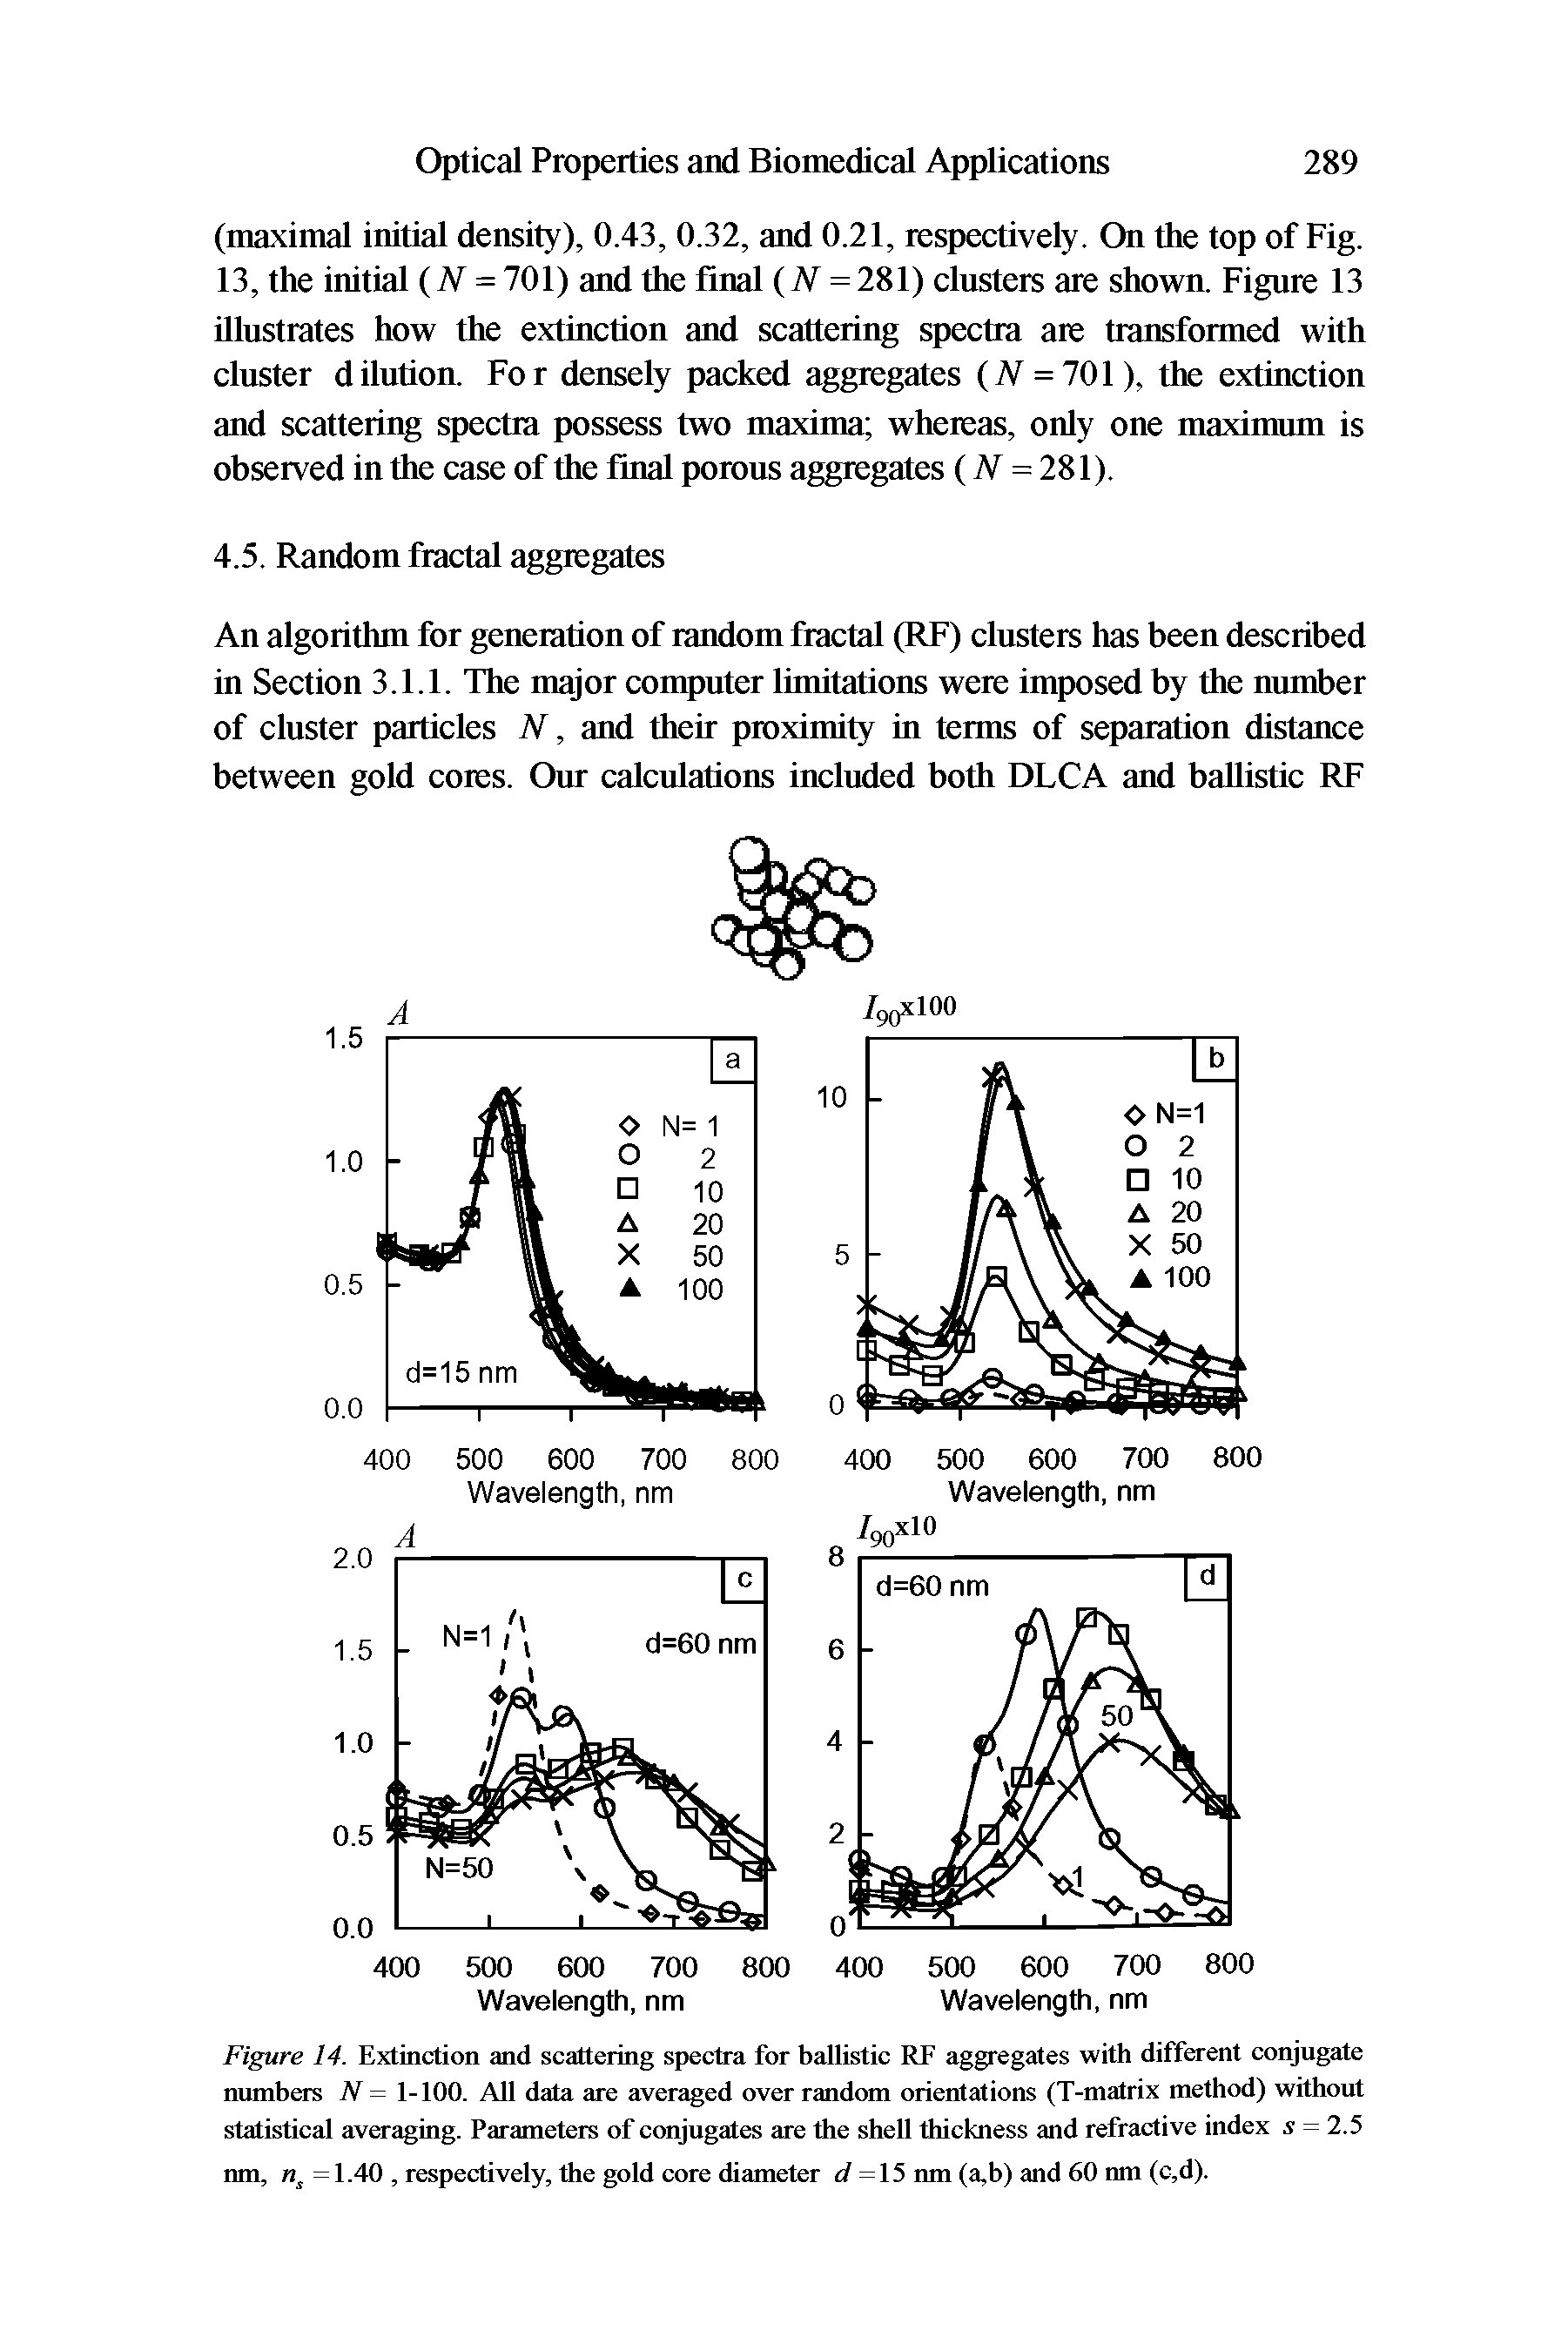 Figure 14. Extinction and scattering spectra for ballistic RF aggregates with different conjugate numbers N = 1-100. All data are averaged over random orientations (T-matrix method) without statistical averaging. Parameters of conjugates are the shell thickness and refractive index s = 2.5 nm, =1.40, respectively, the gold core diameter <7 =15 nm (a,b) and 60 nm (c,d).